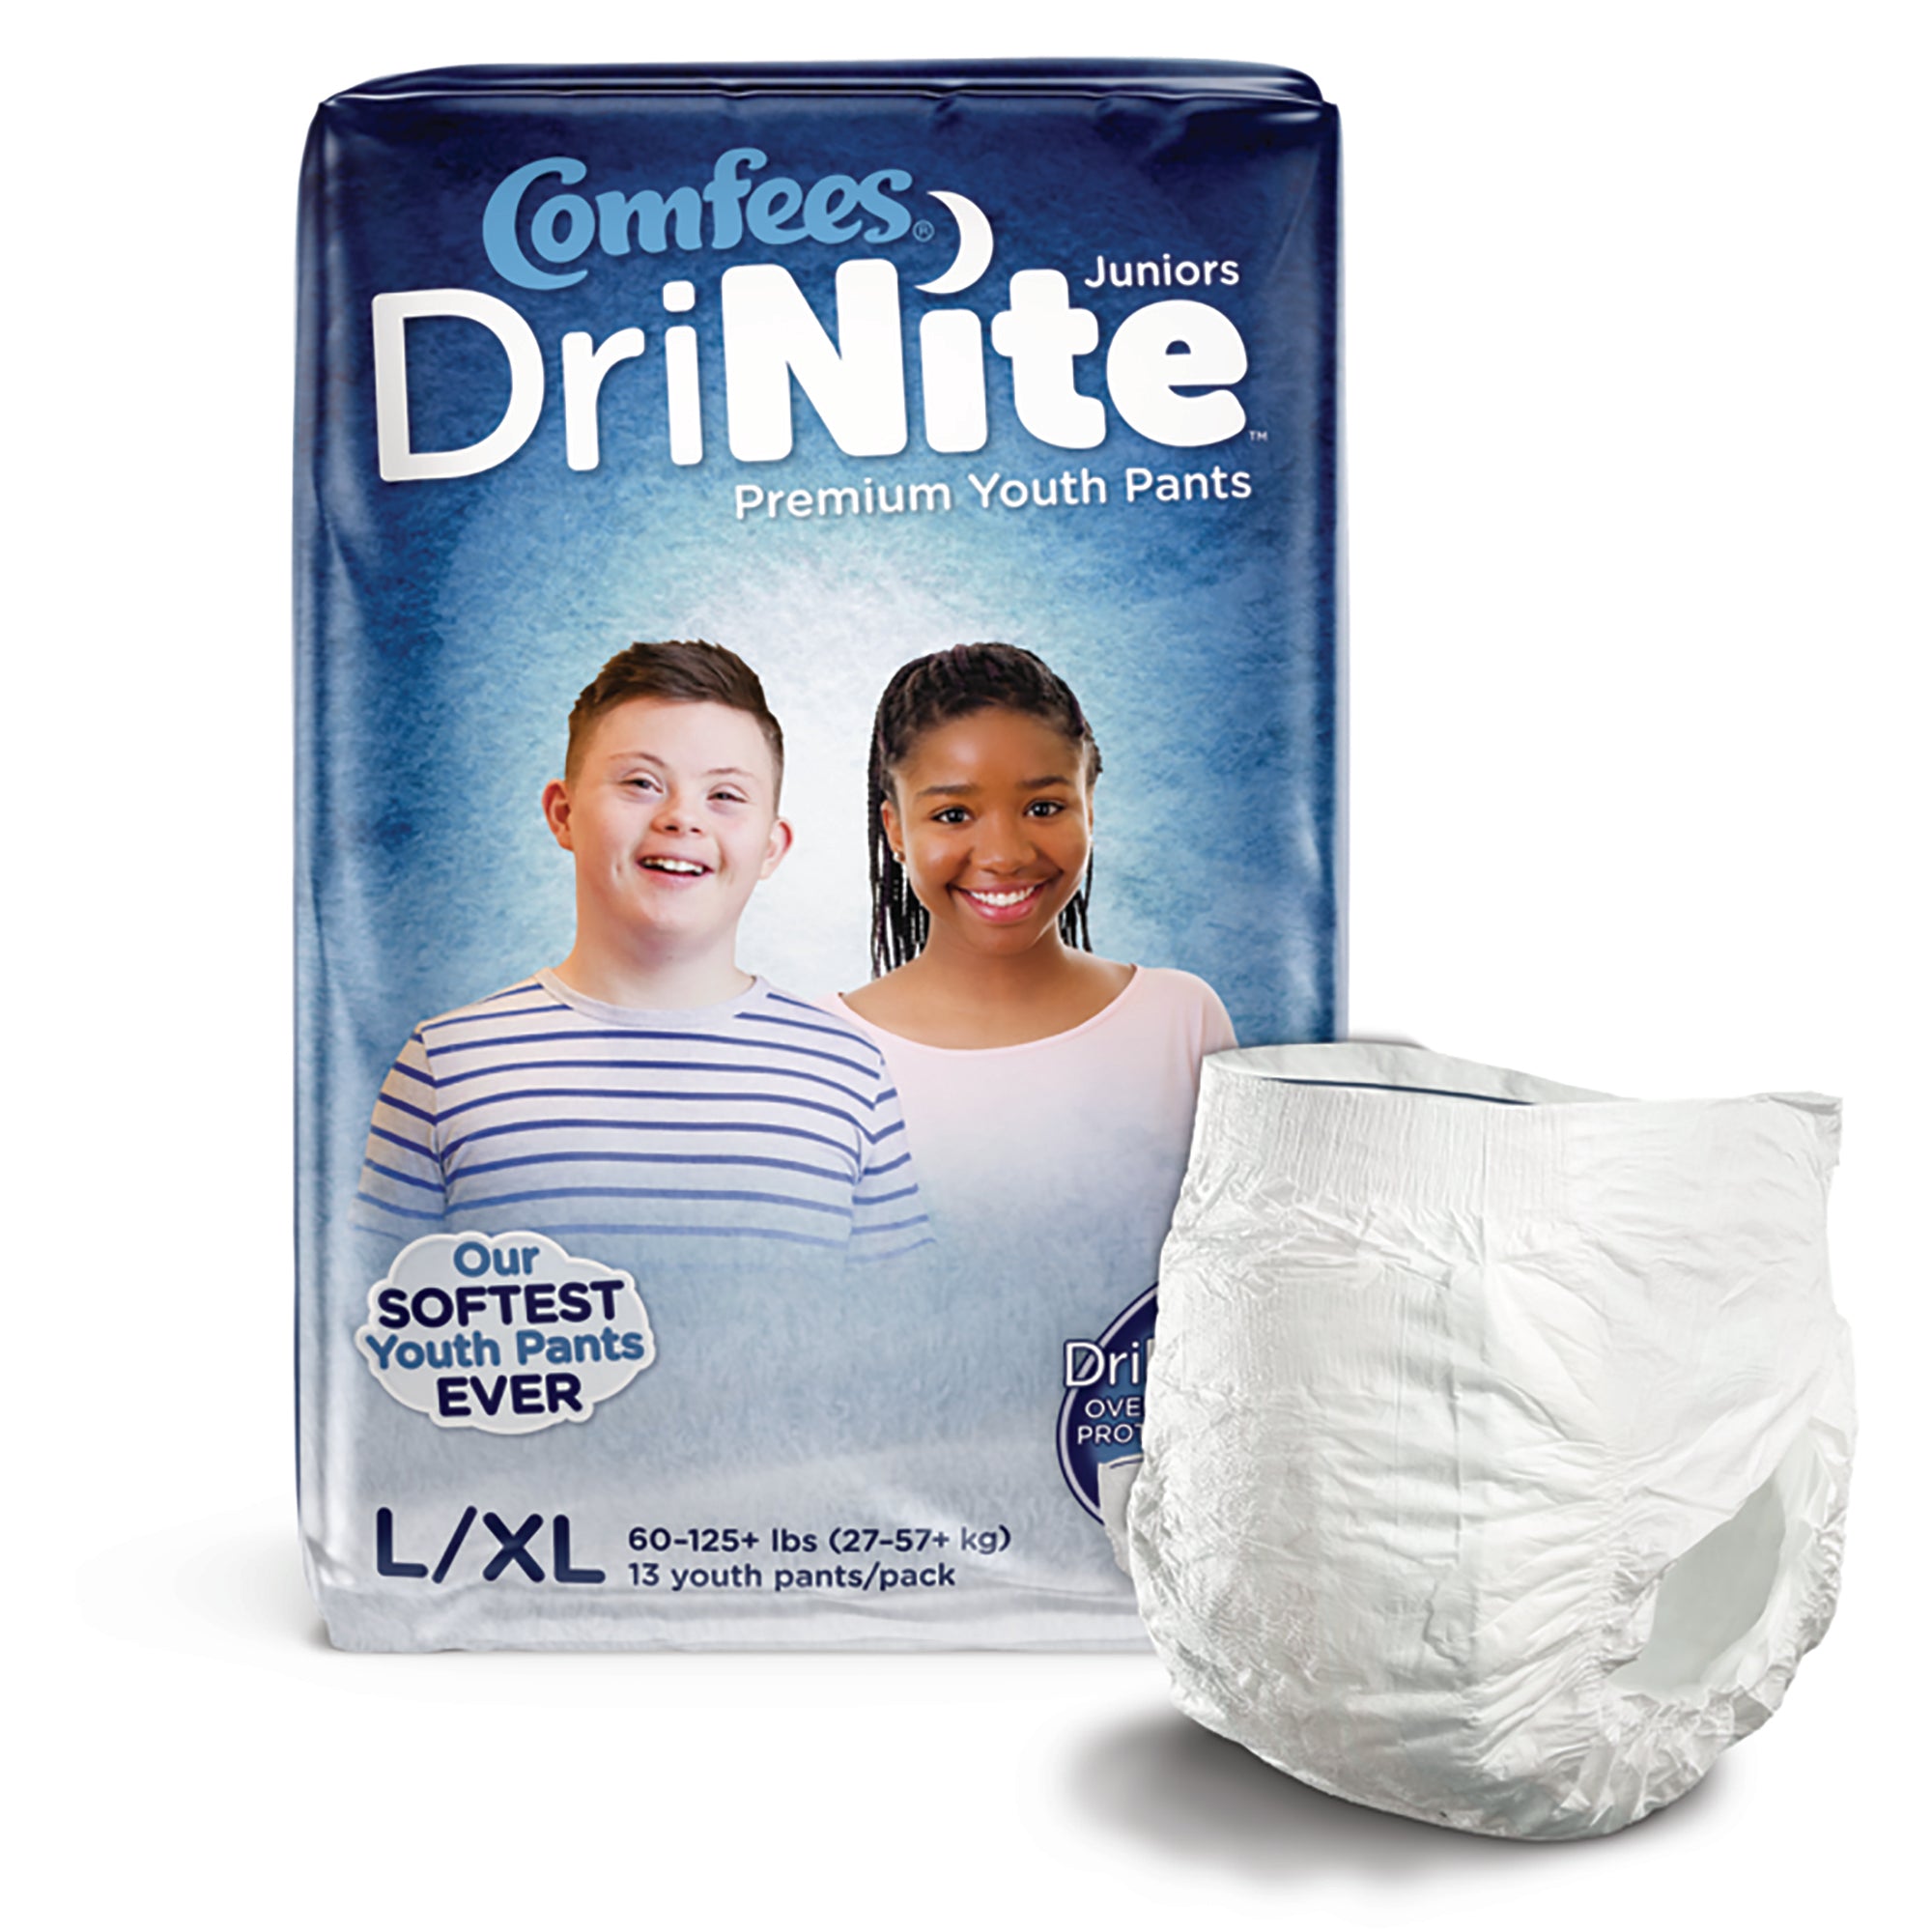 Comfees? DriNite? Juniors Absorbent Underwear, Large / Extra Large